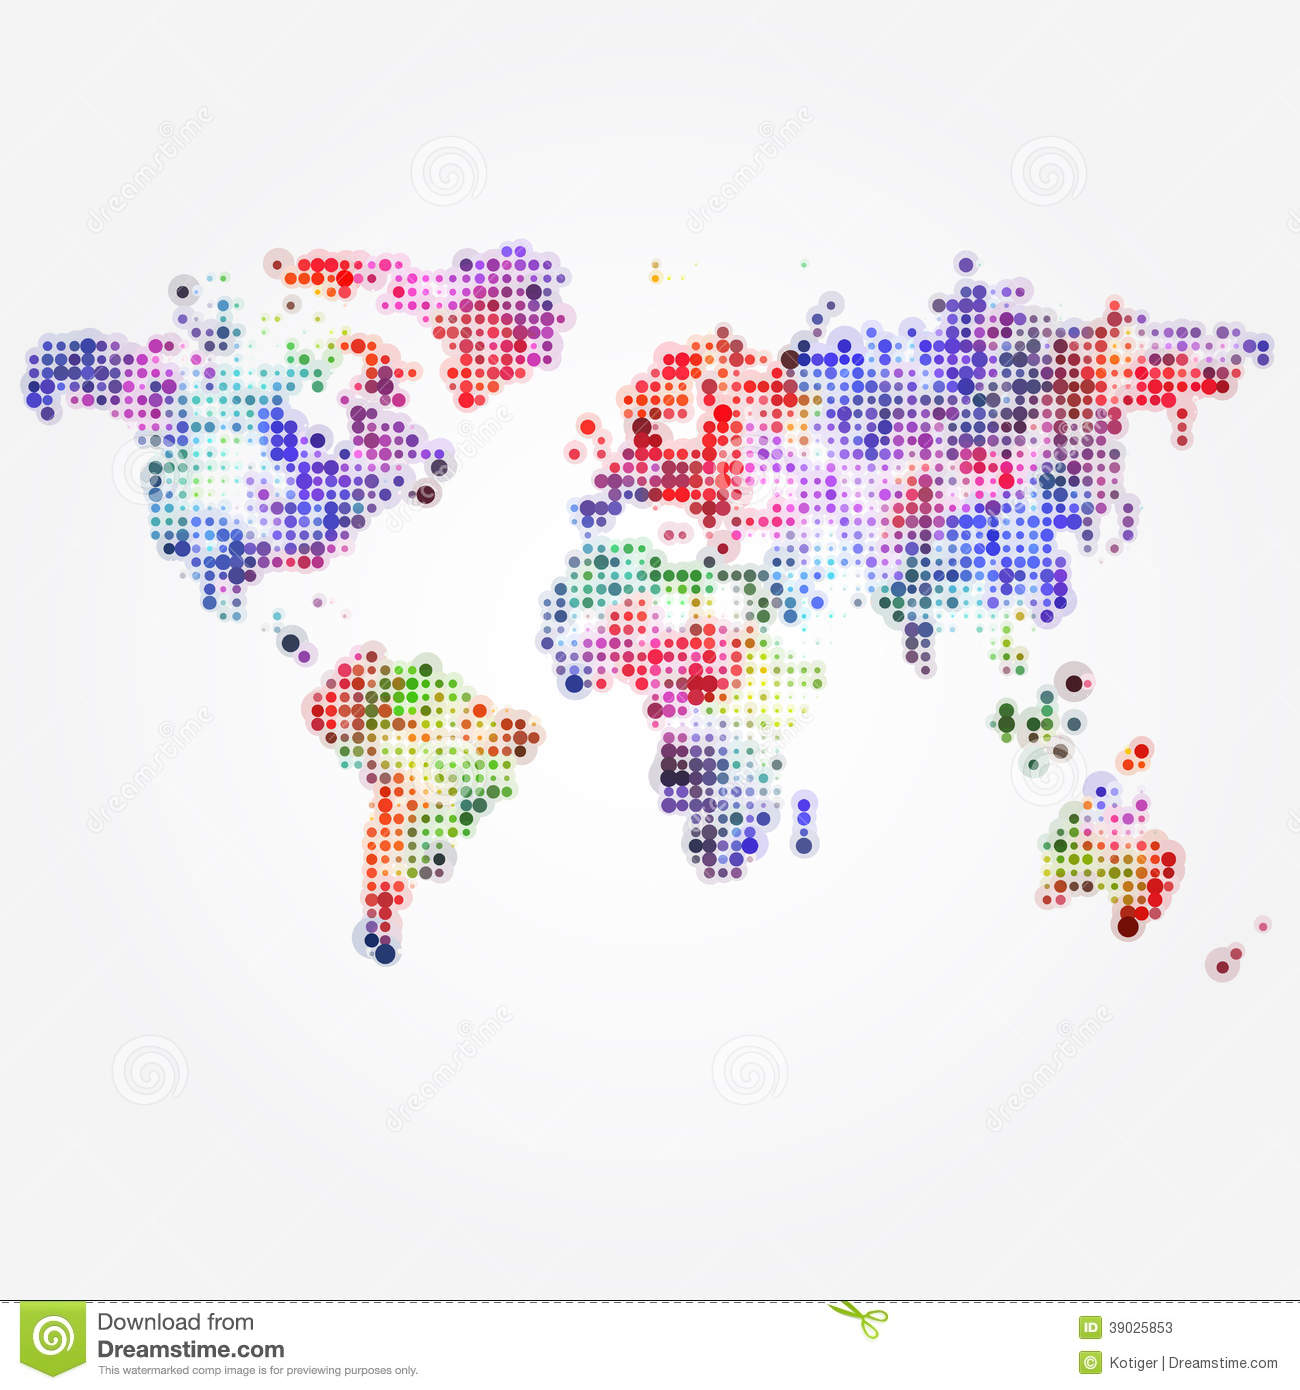 Free Download Colorful World Map Poster Colorful World Map Wallpaper 1300x1390 For Your Desktop Mobile Tablet Explore 49 Wallpaper World Maps For Sale Wallpaper World Maps World Maps Wallpaper